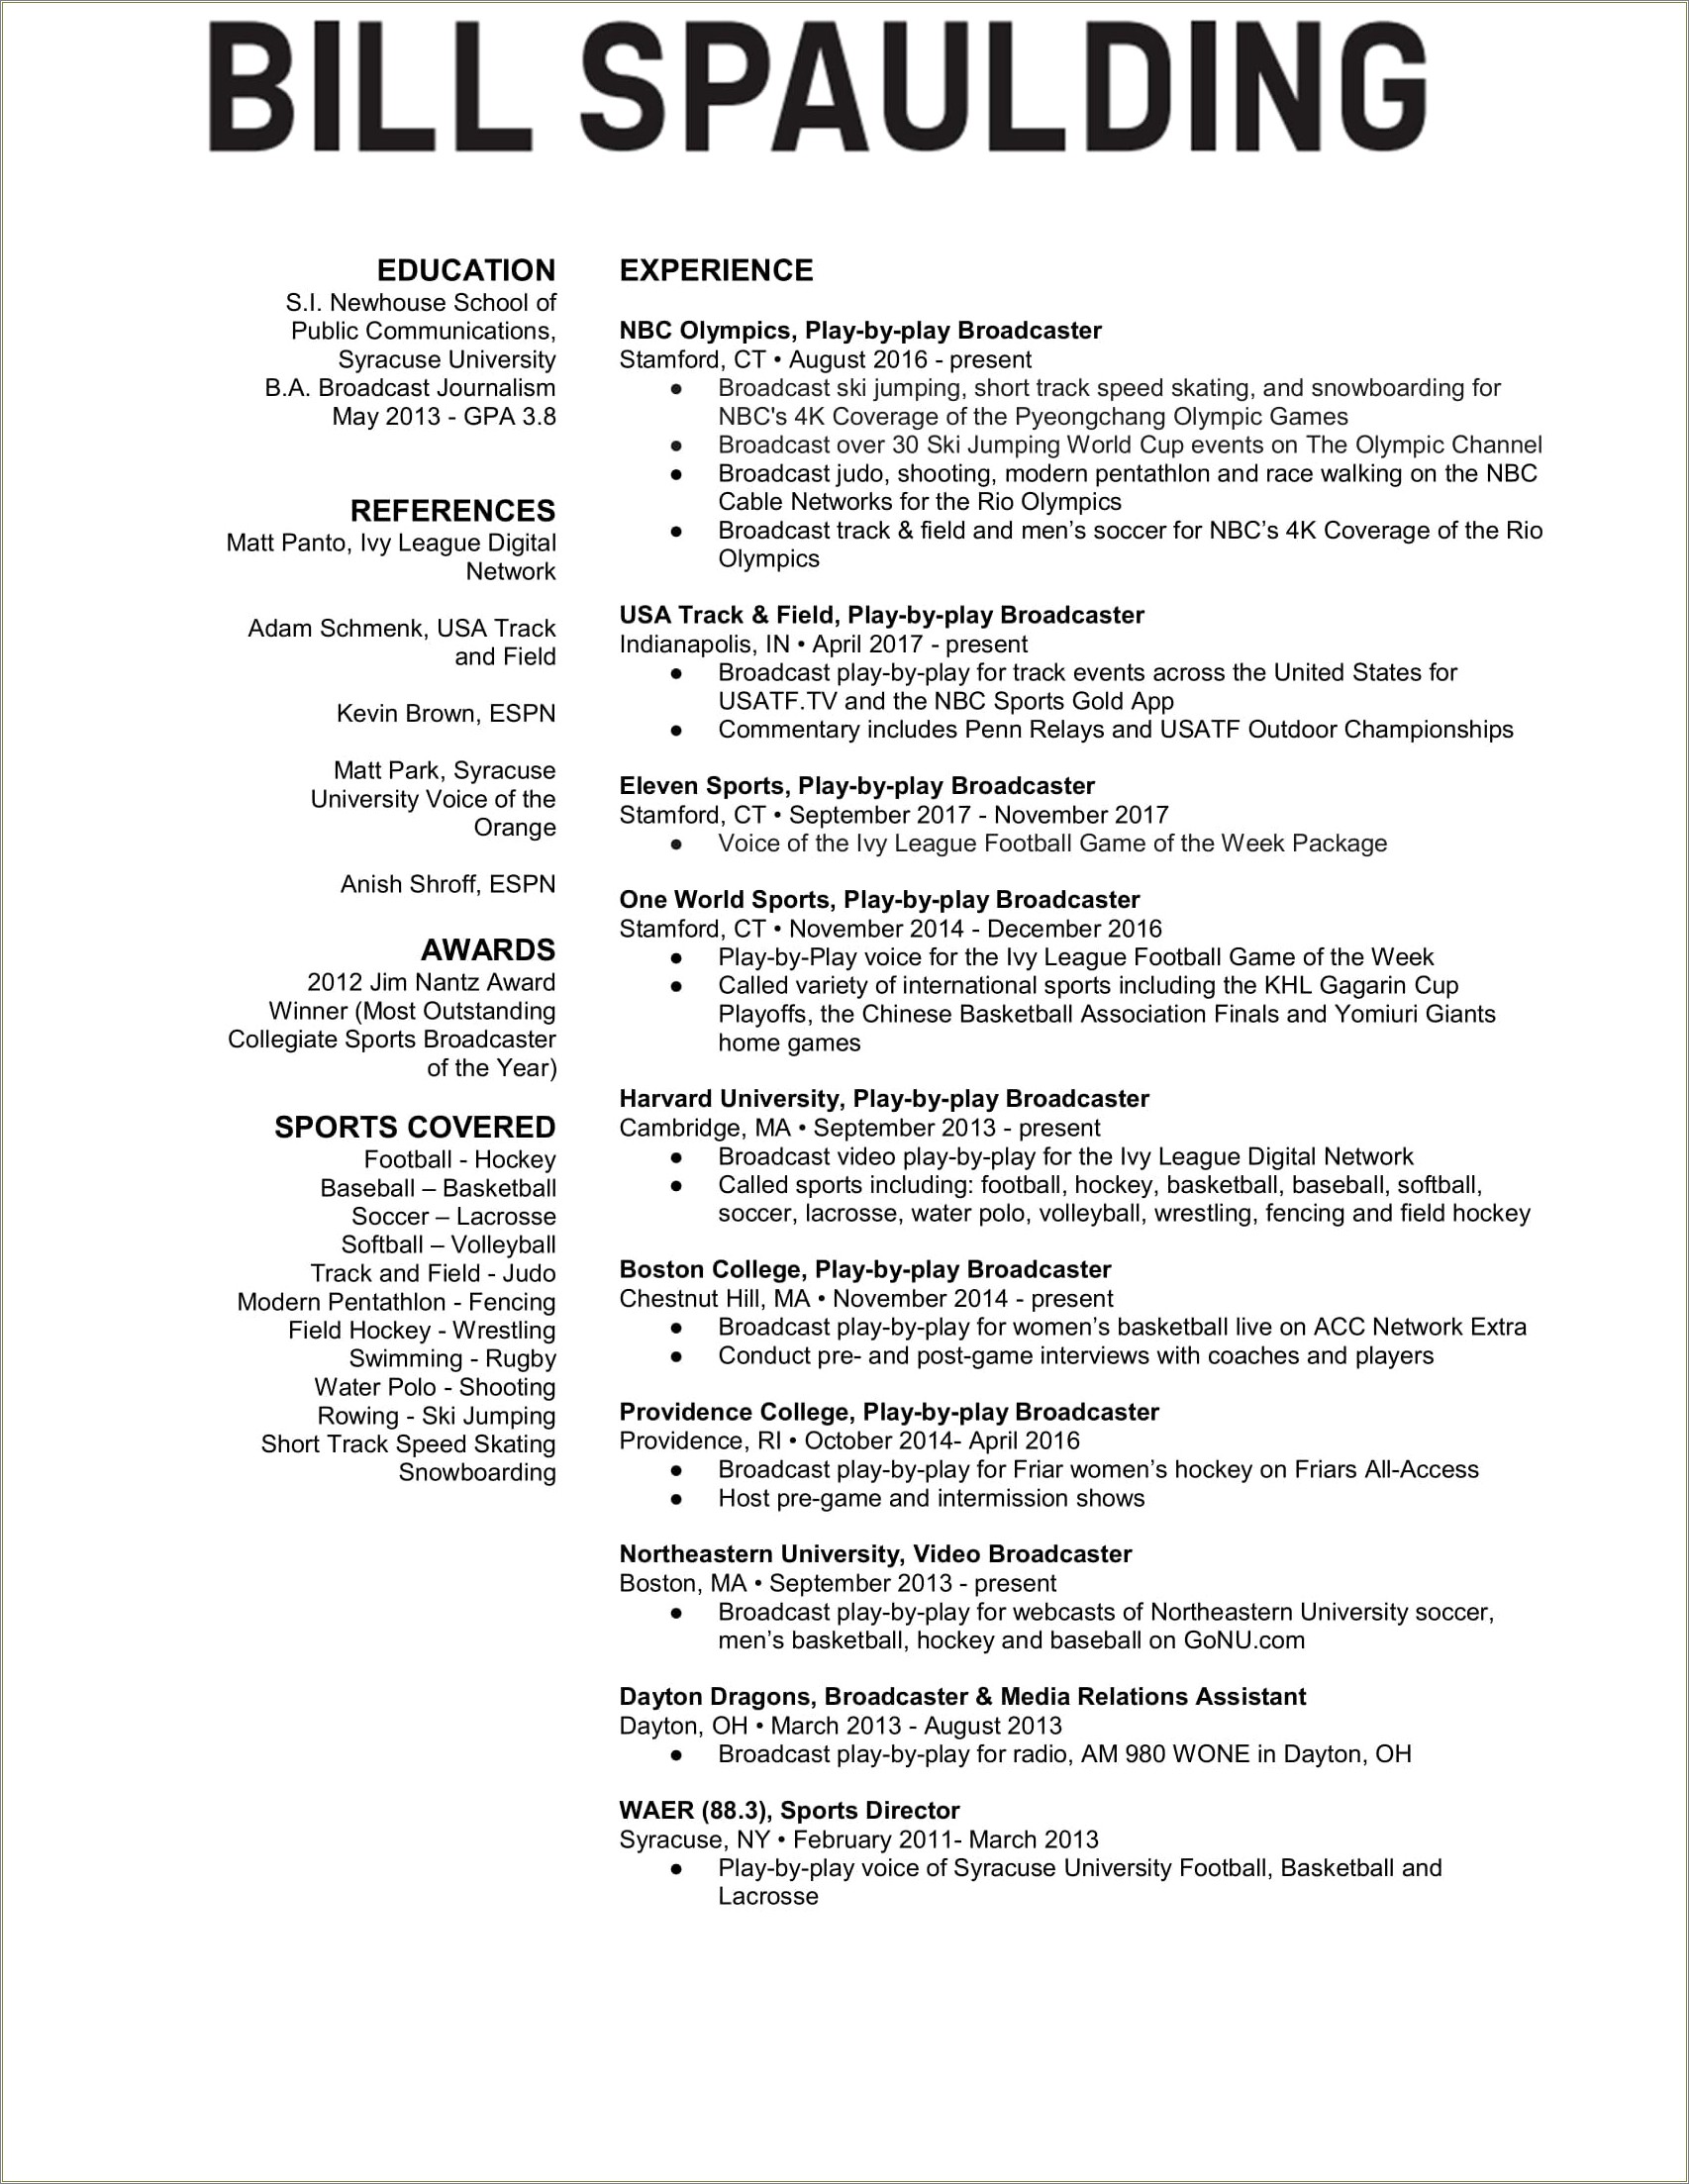 Resume With Connecticut School Of Broadcasting